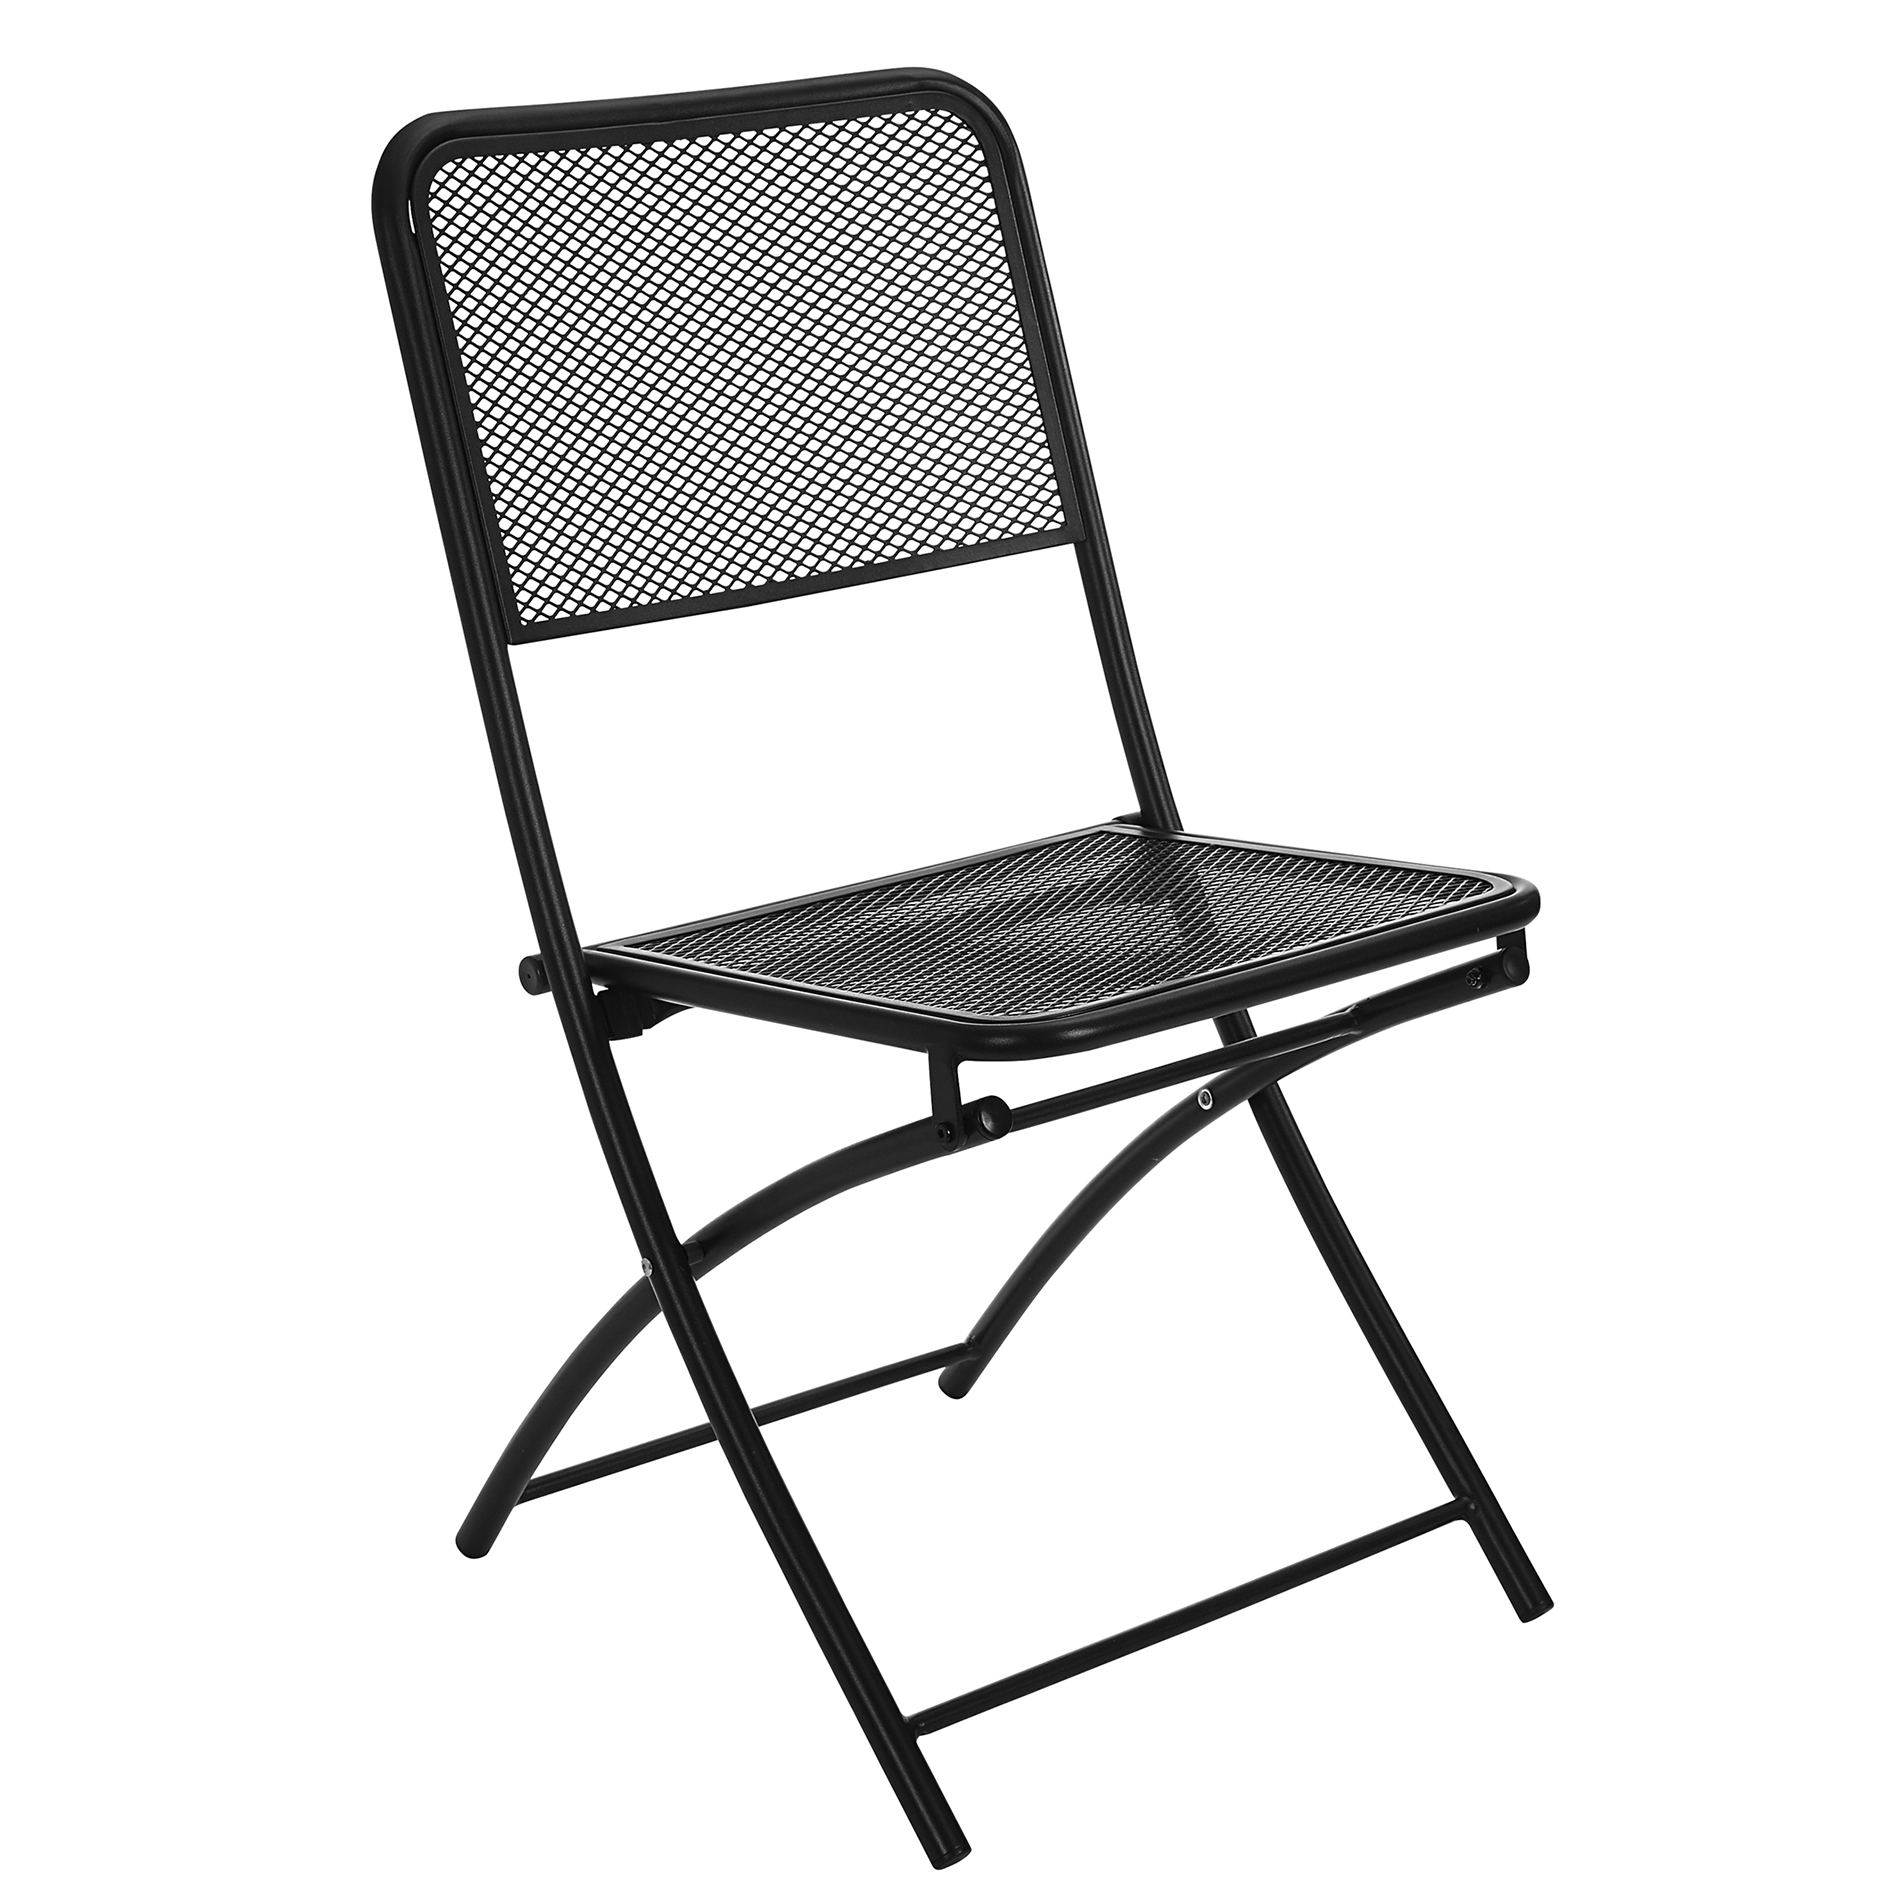 Jaclyn Smith Armless Wrought Iron Mesh Metal Chair